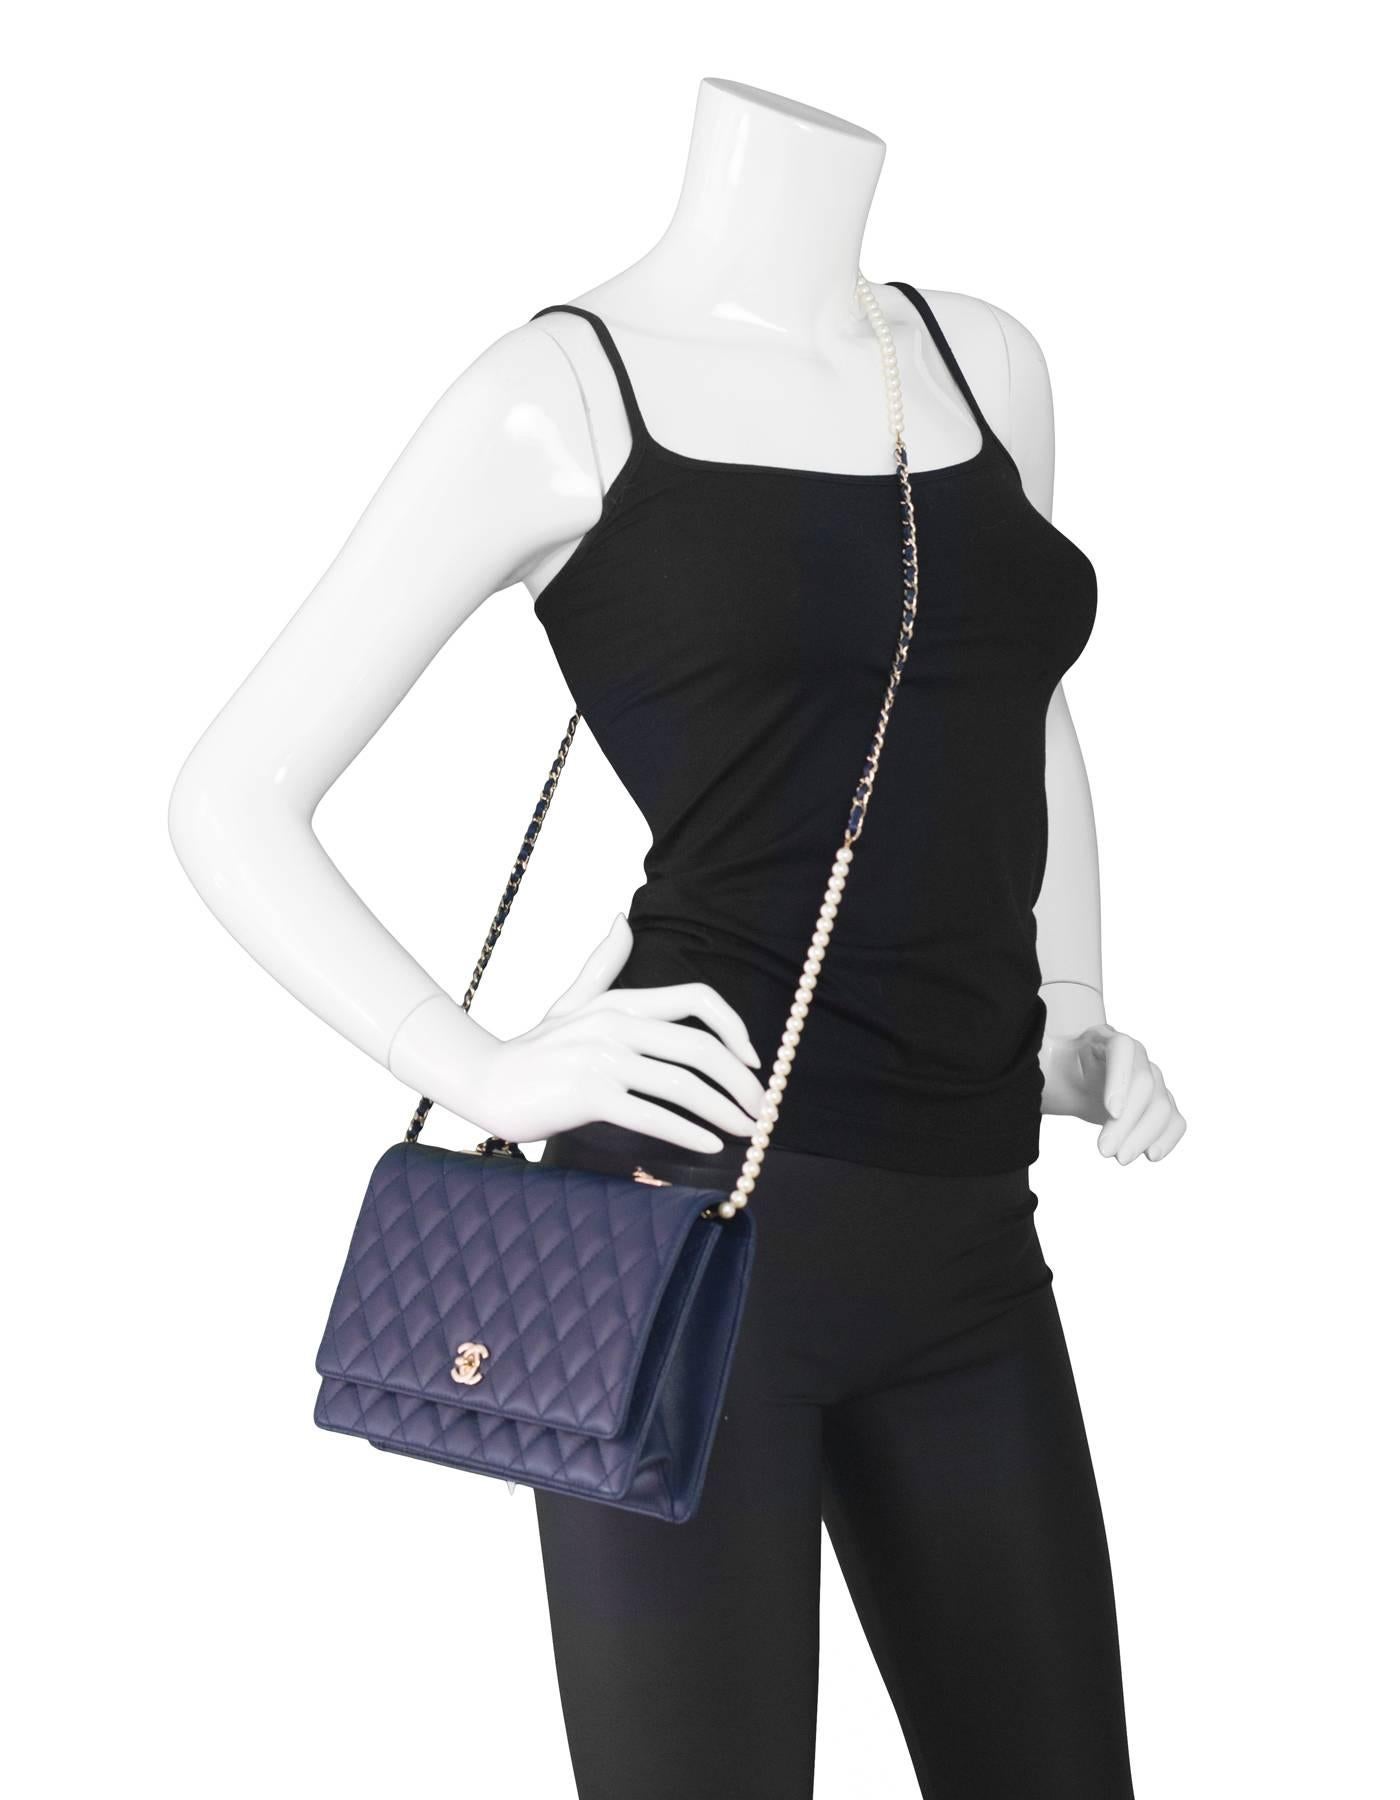 Chanel Navy Lambskin Large Fantasy Pearls Crossbody Flap Bag
Features delicate chainlink and pearl crossbody strap

Made In: Italy
Year of Production: 2016
Color: Navy
Hardware: Goldtone
Materials: Lambskin, metal, faux pearl
Lining: Navy